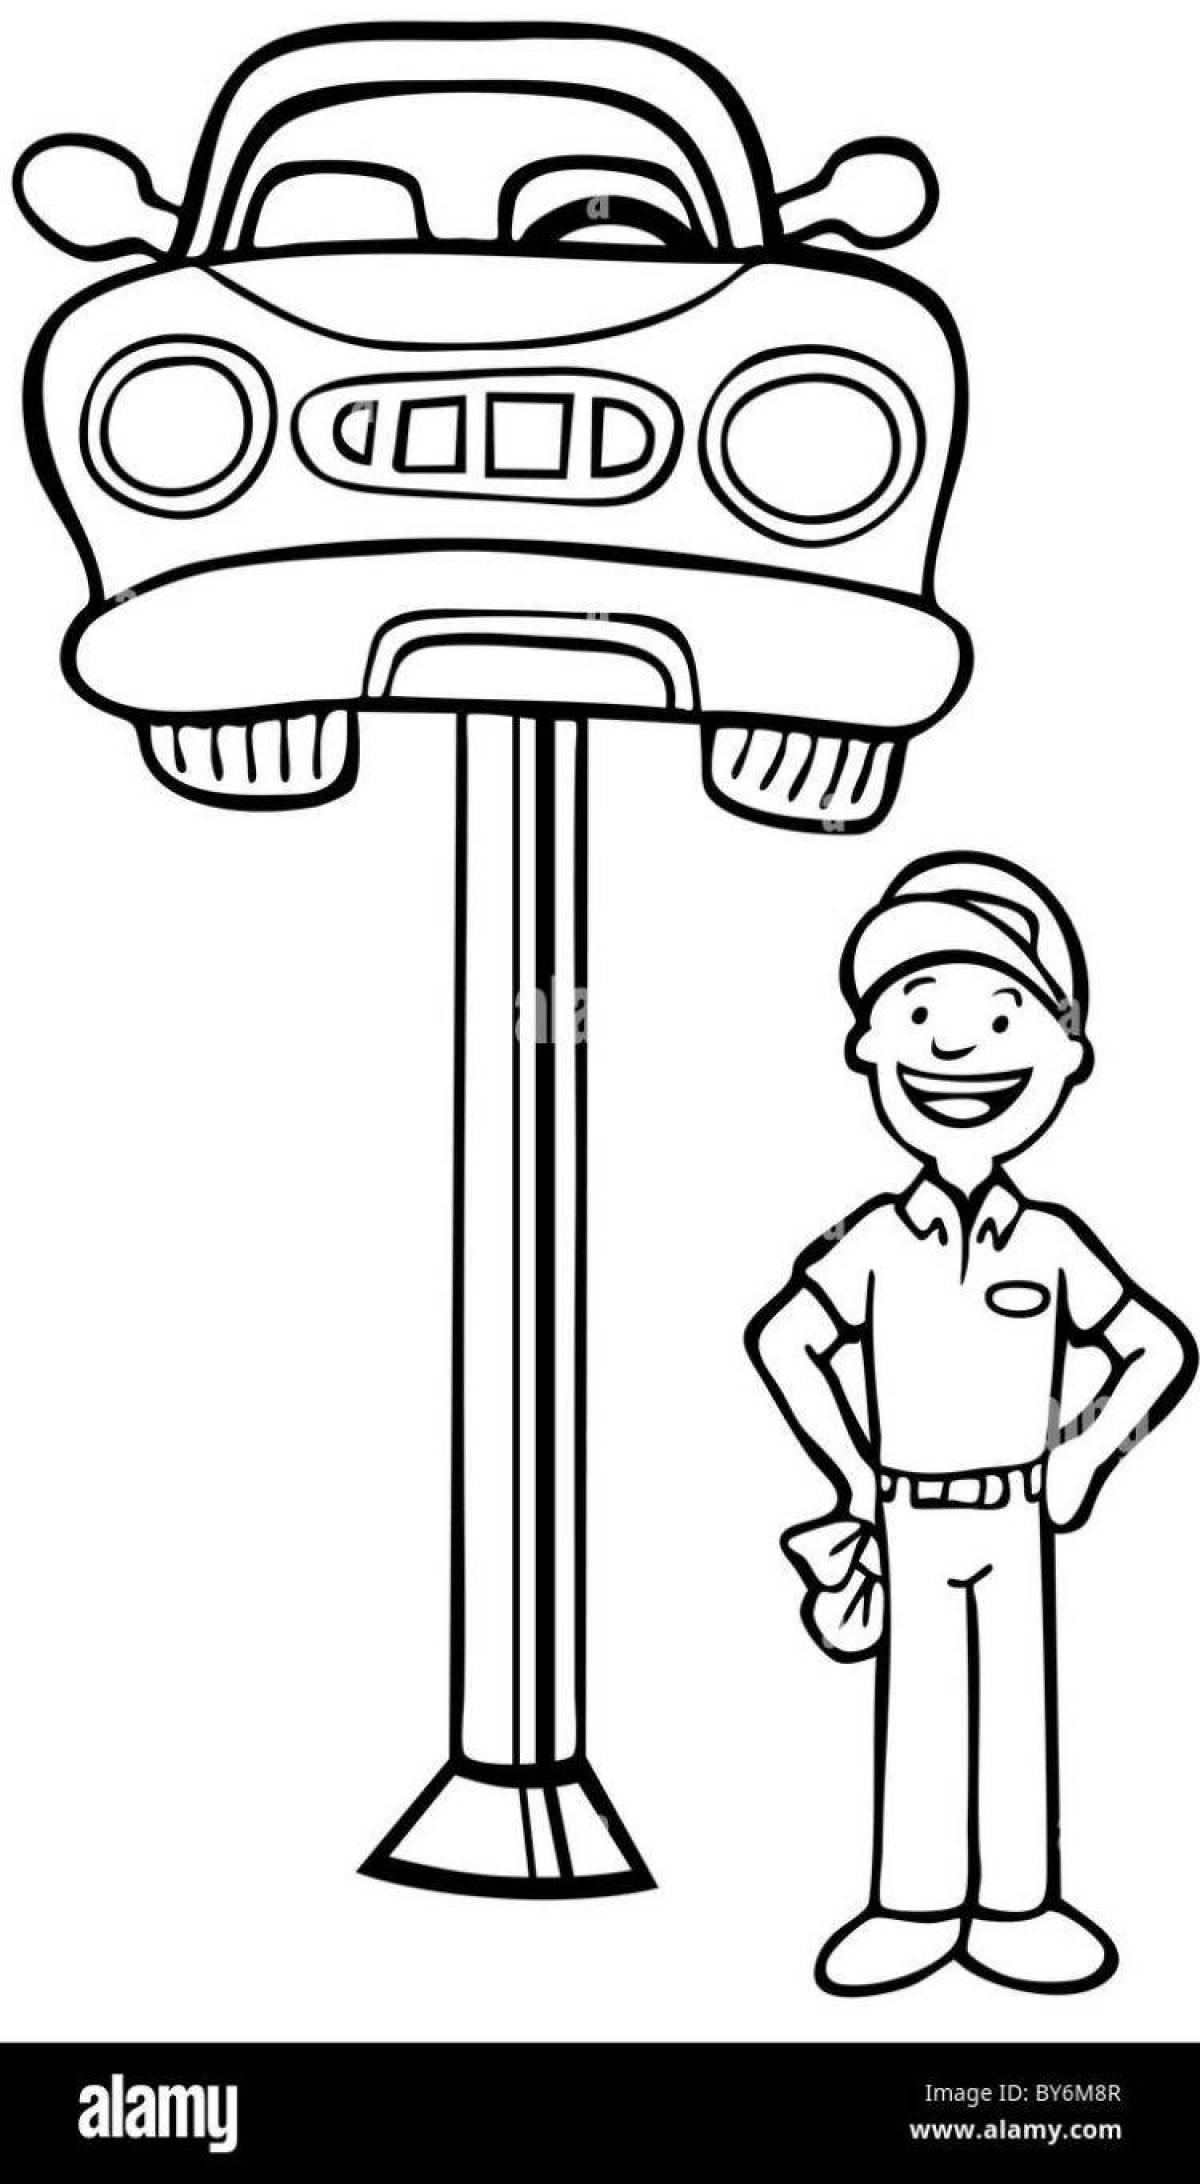 Coloring page charming car mechanic